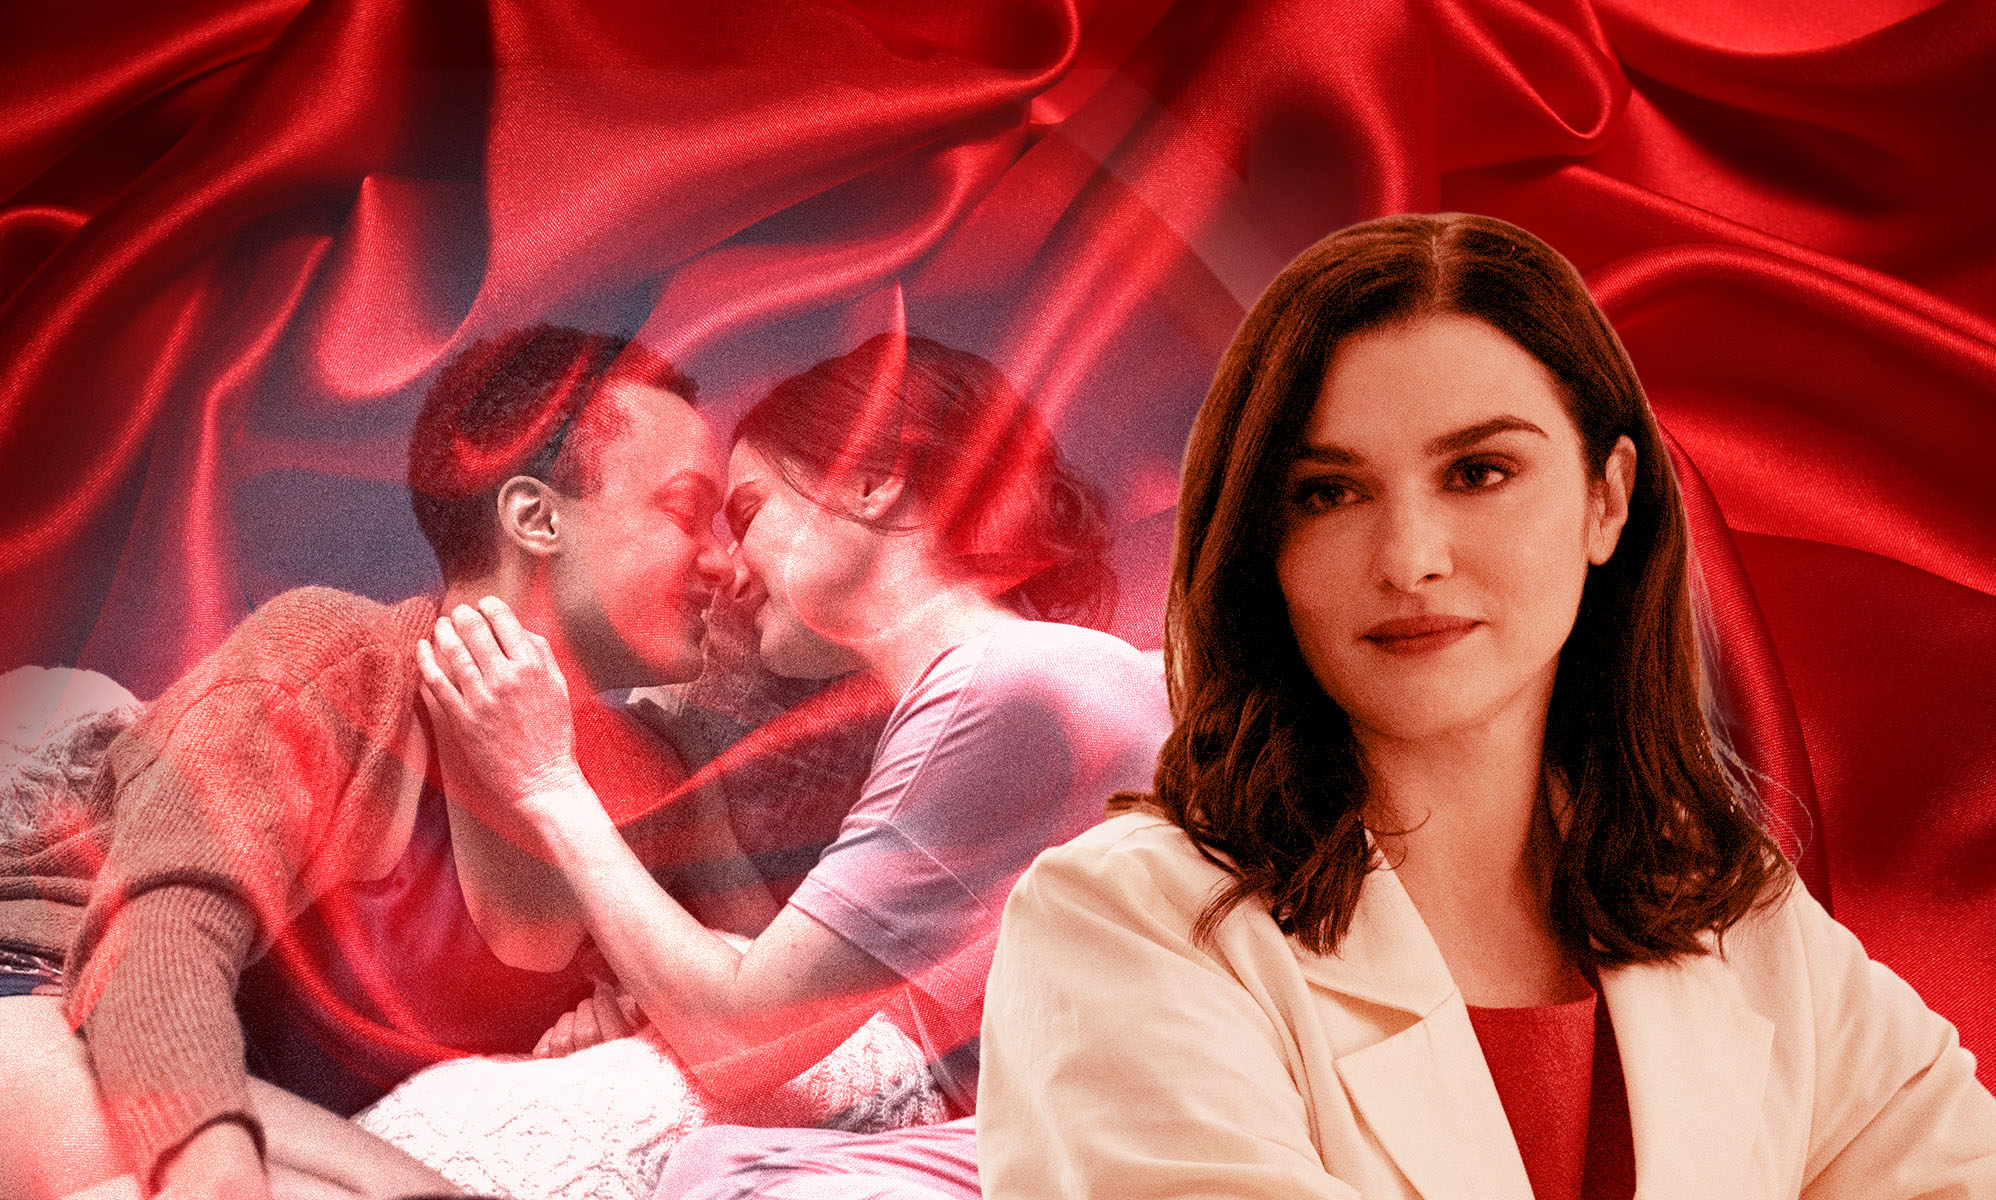 Rachel Weisz on Dead Ringers and being a lesbian icon